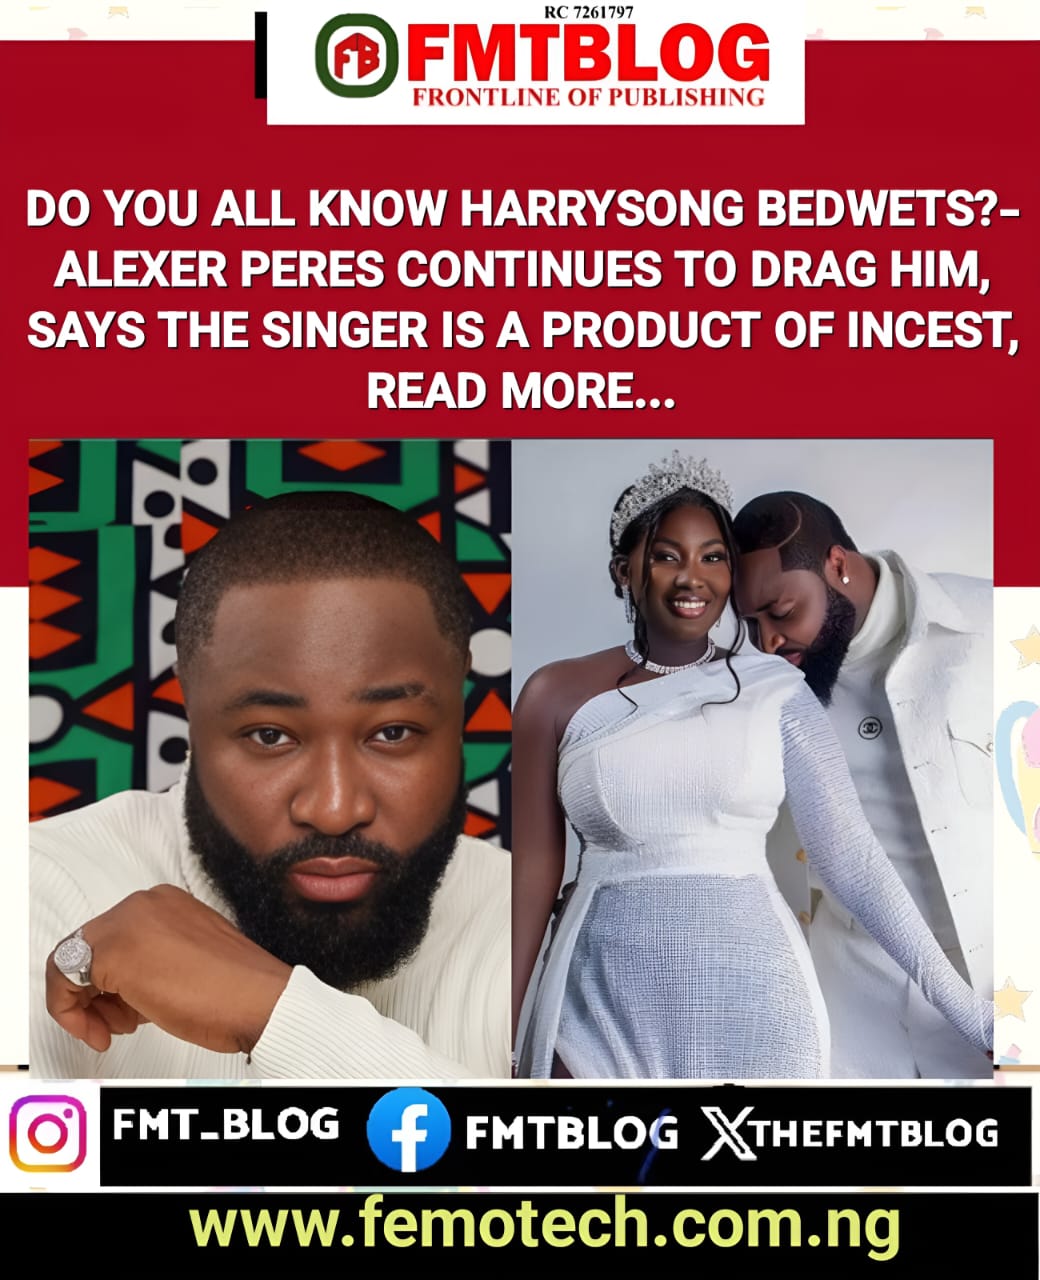 Do You All Know Harrysong Bedwets?- Alexer Peres Continues To Drag Him, Says The Singer Is A Product Of Incest